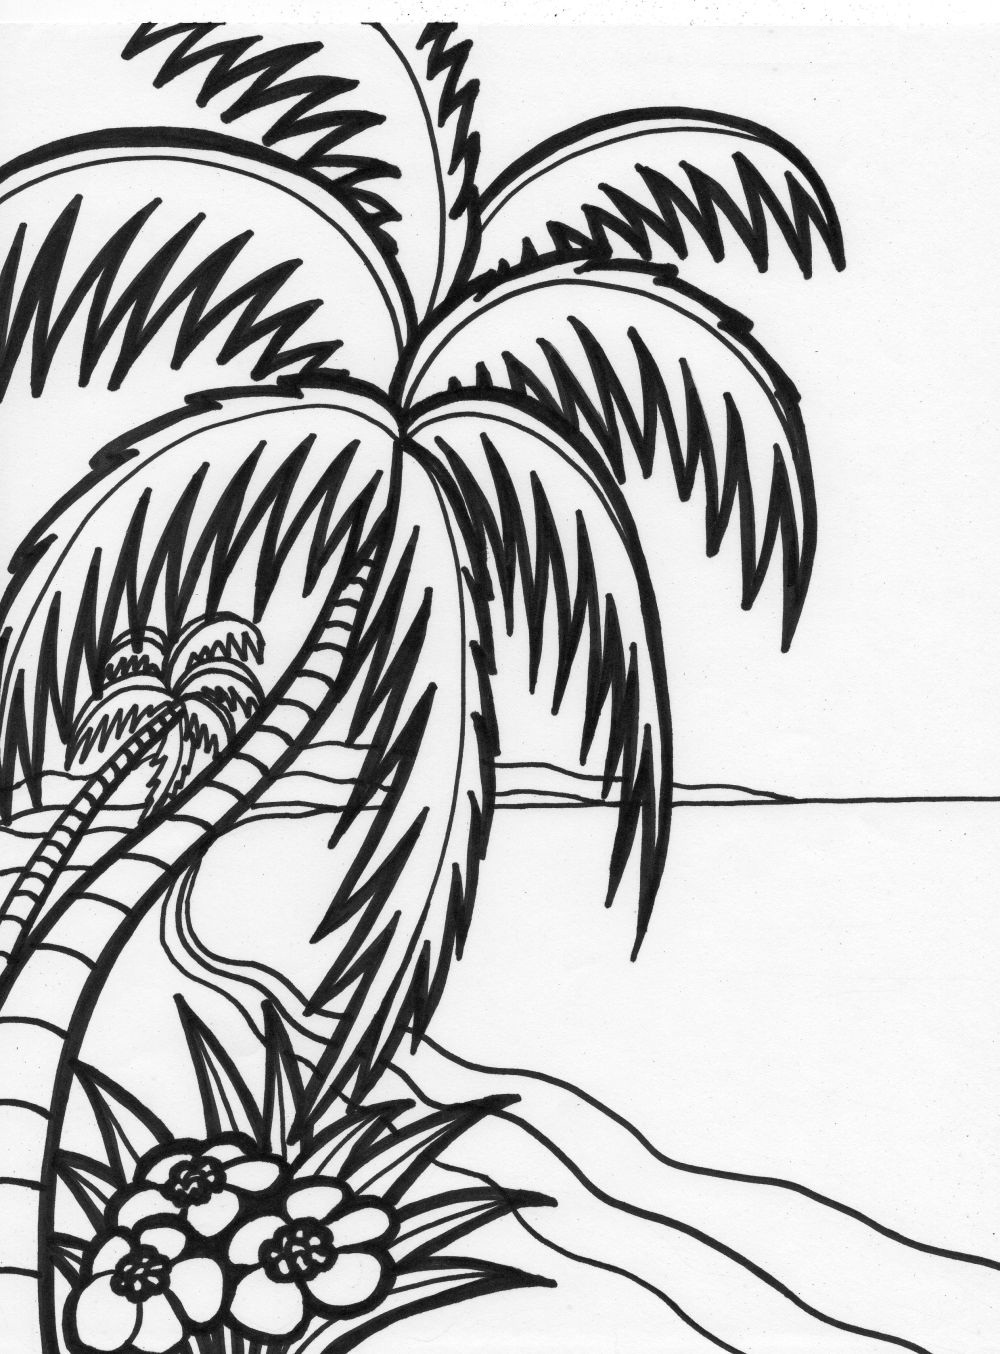 beach-coloring-pages-beach-scenes-activities